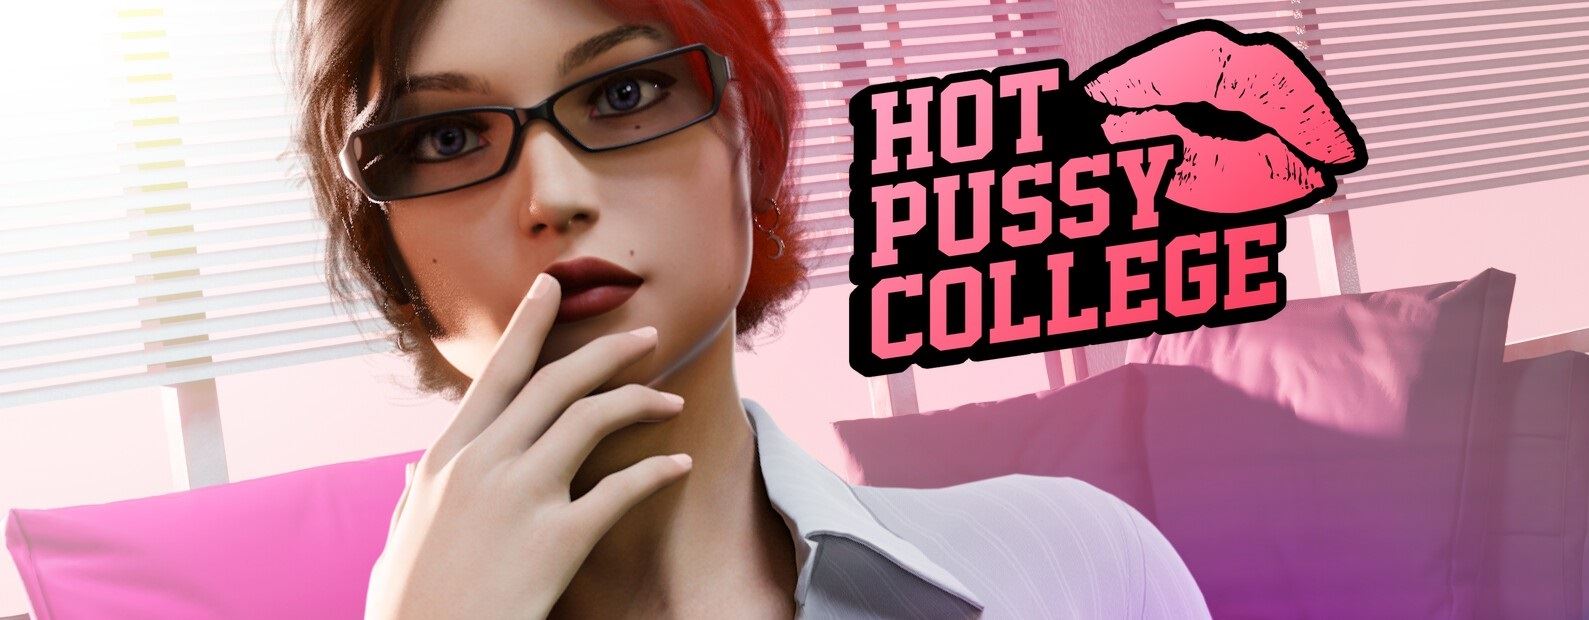 Www Pussy 15 Com Download - Hot Pussy College Unity Porn Sex Game v.2022-10-15 Download for Windows